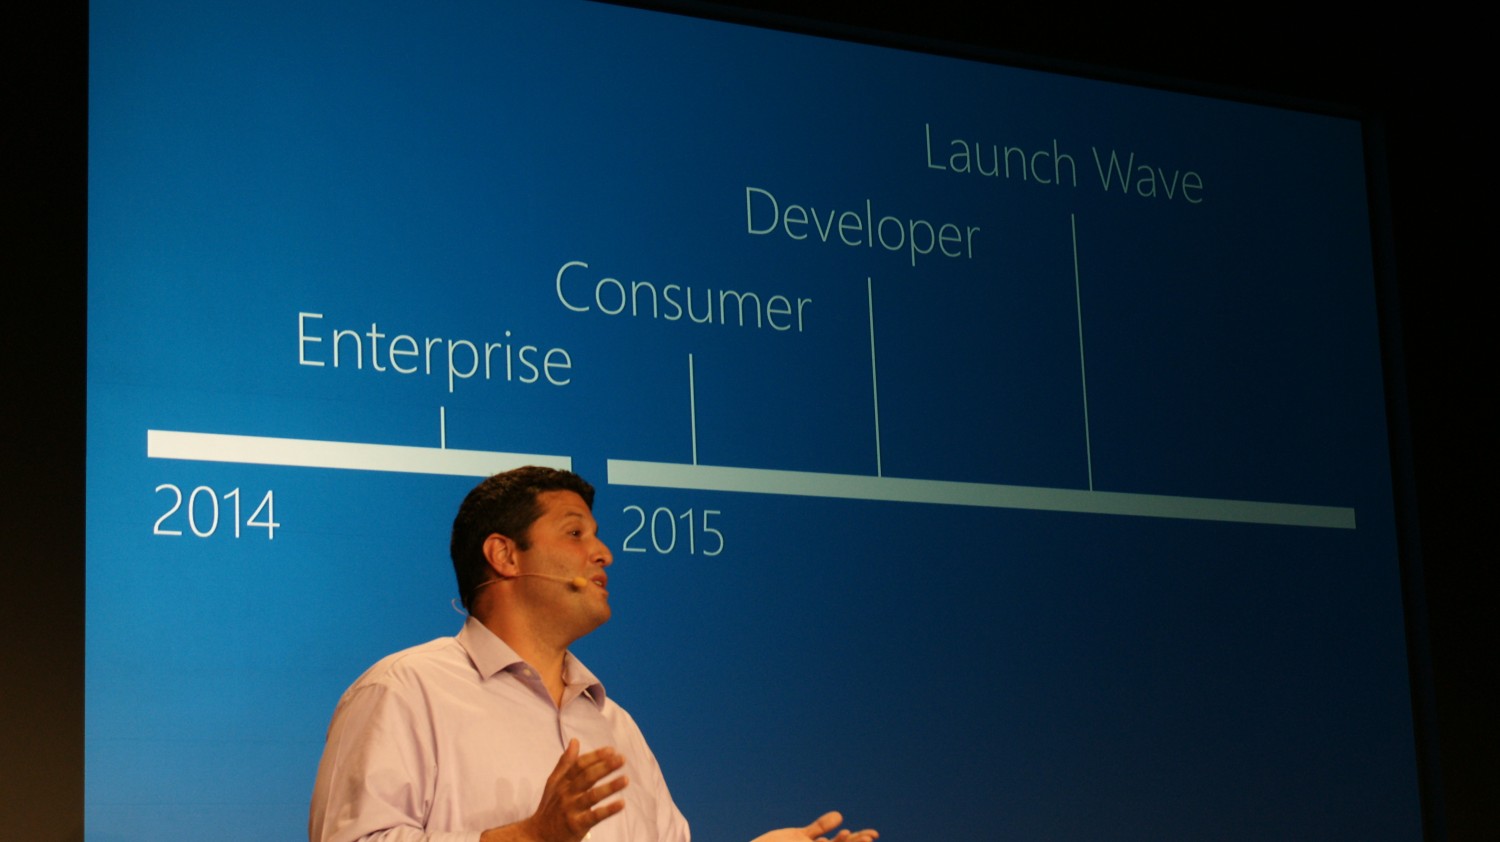 Microsoft Windows 10 will have 7 editions